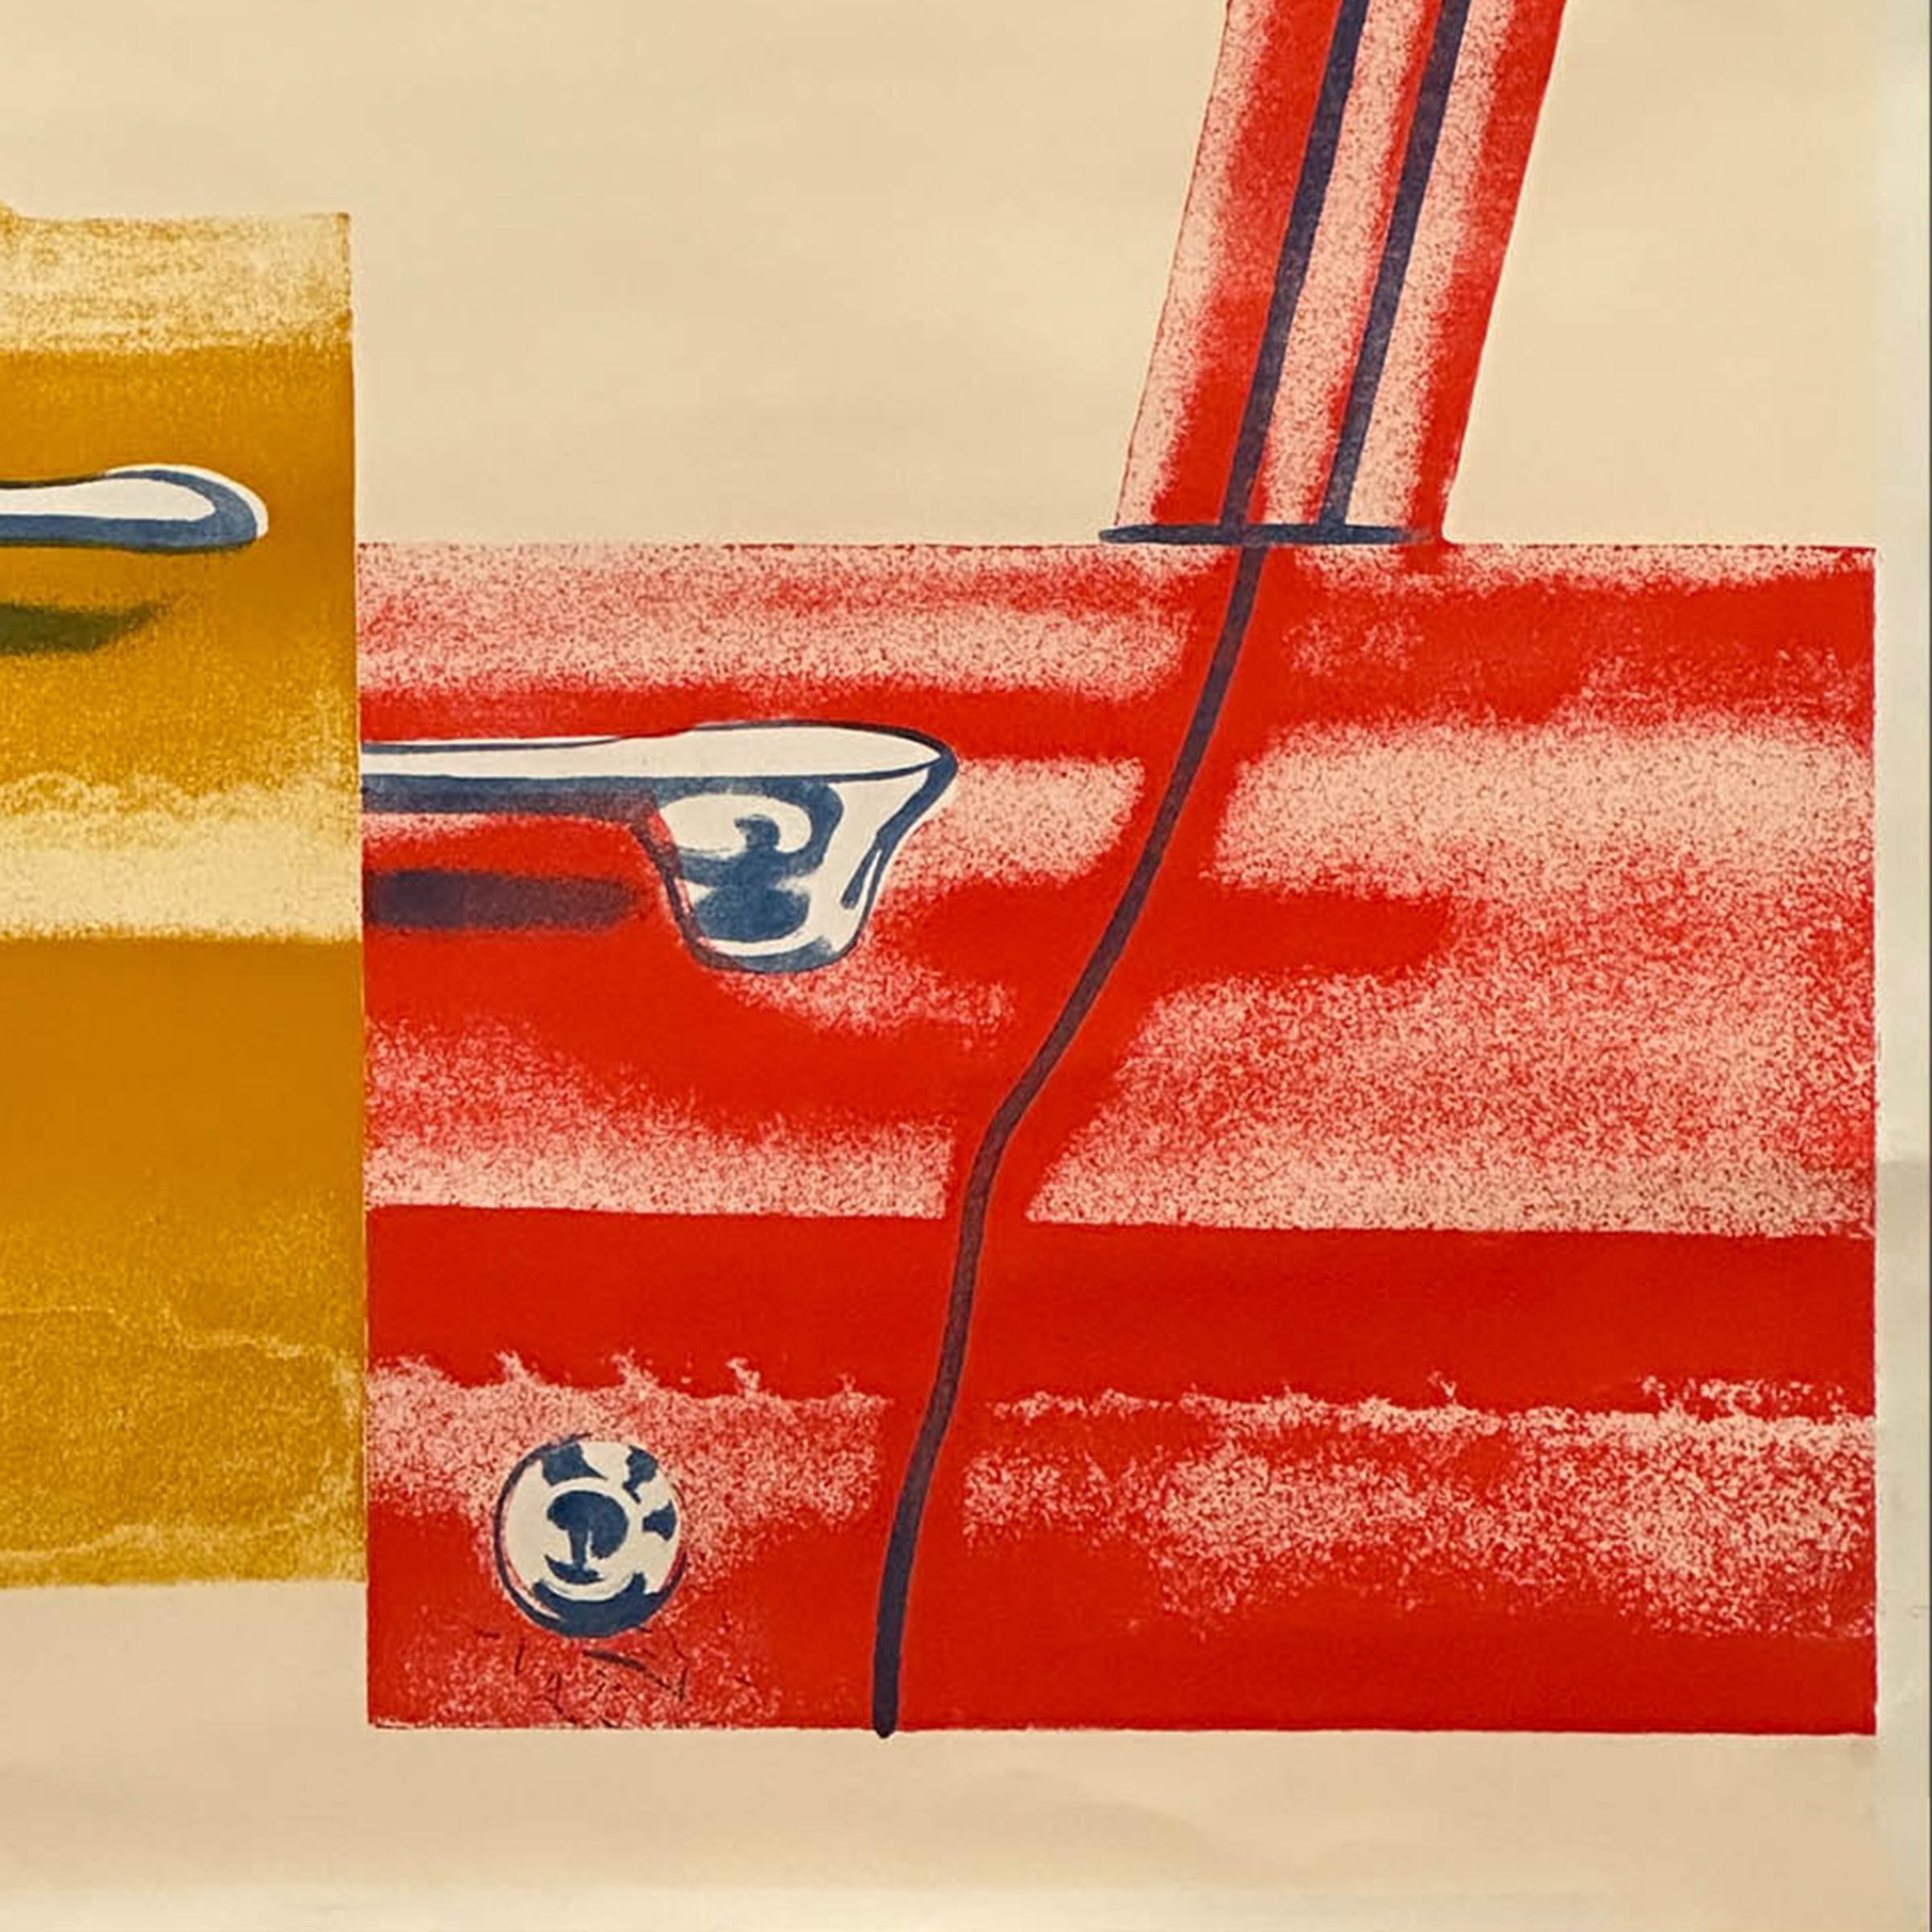 Other “Roll Down” 1965 Rosenquist Lithograph 18×22 For Sale